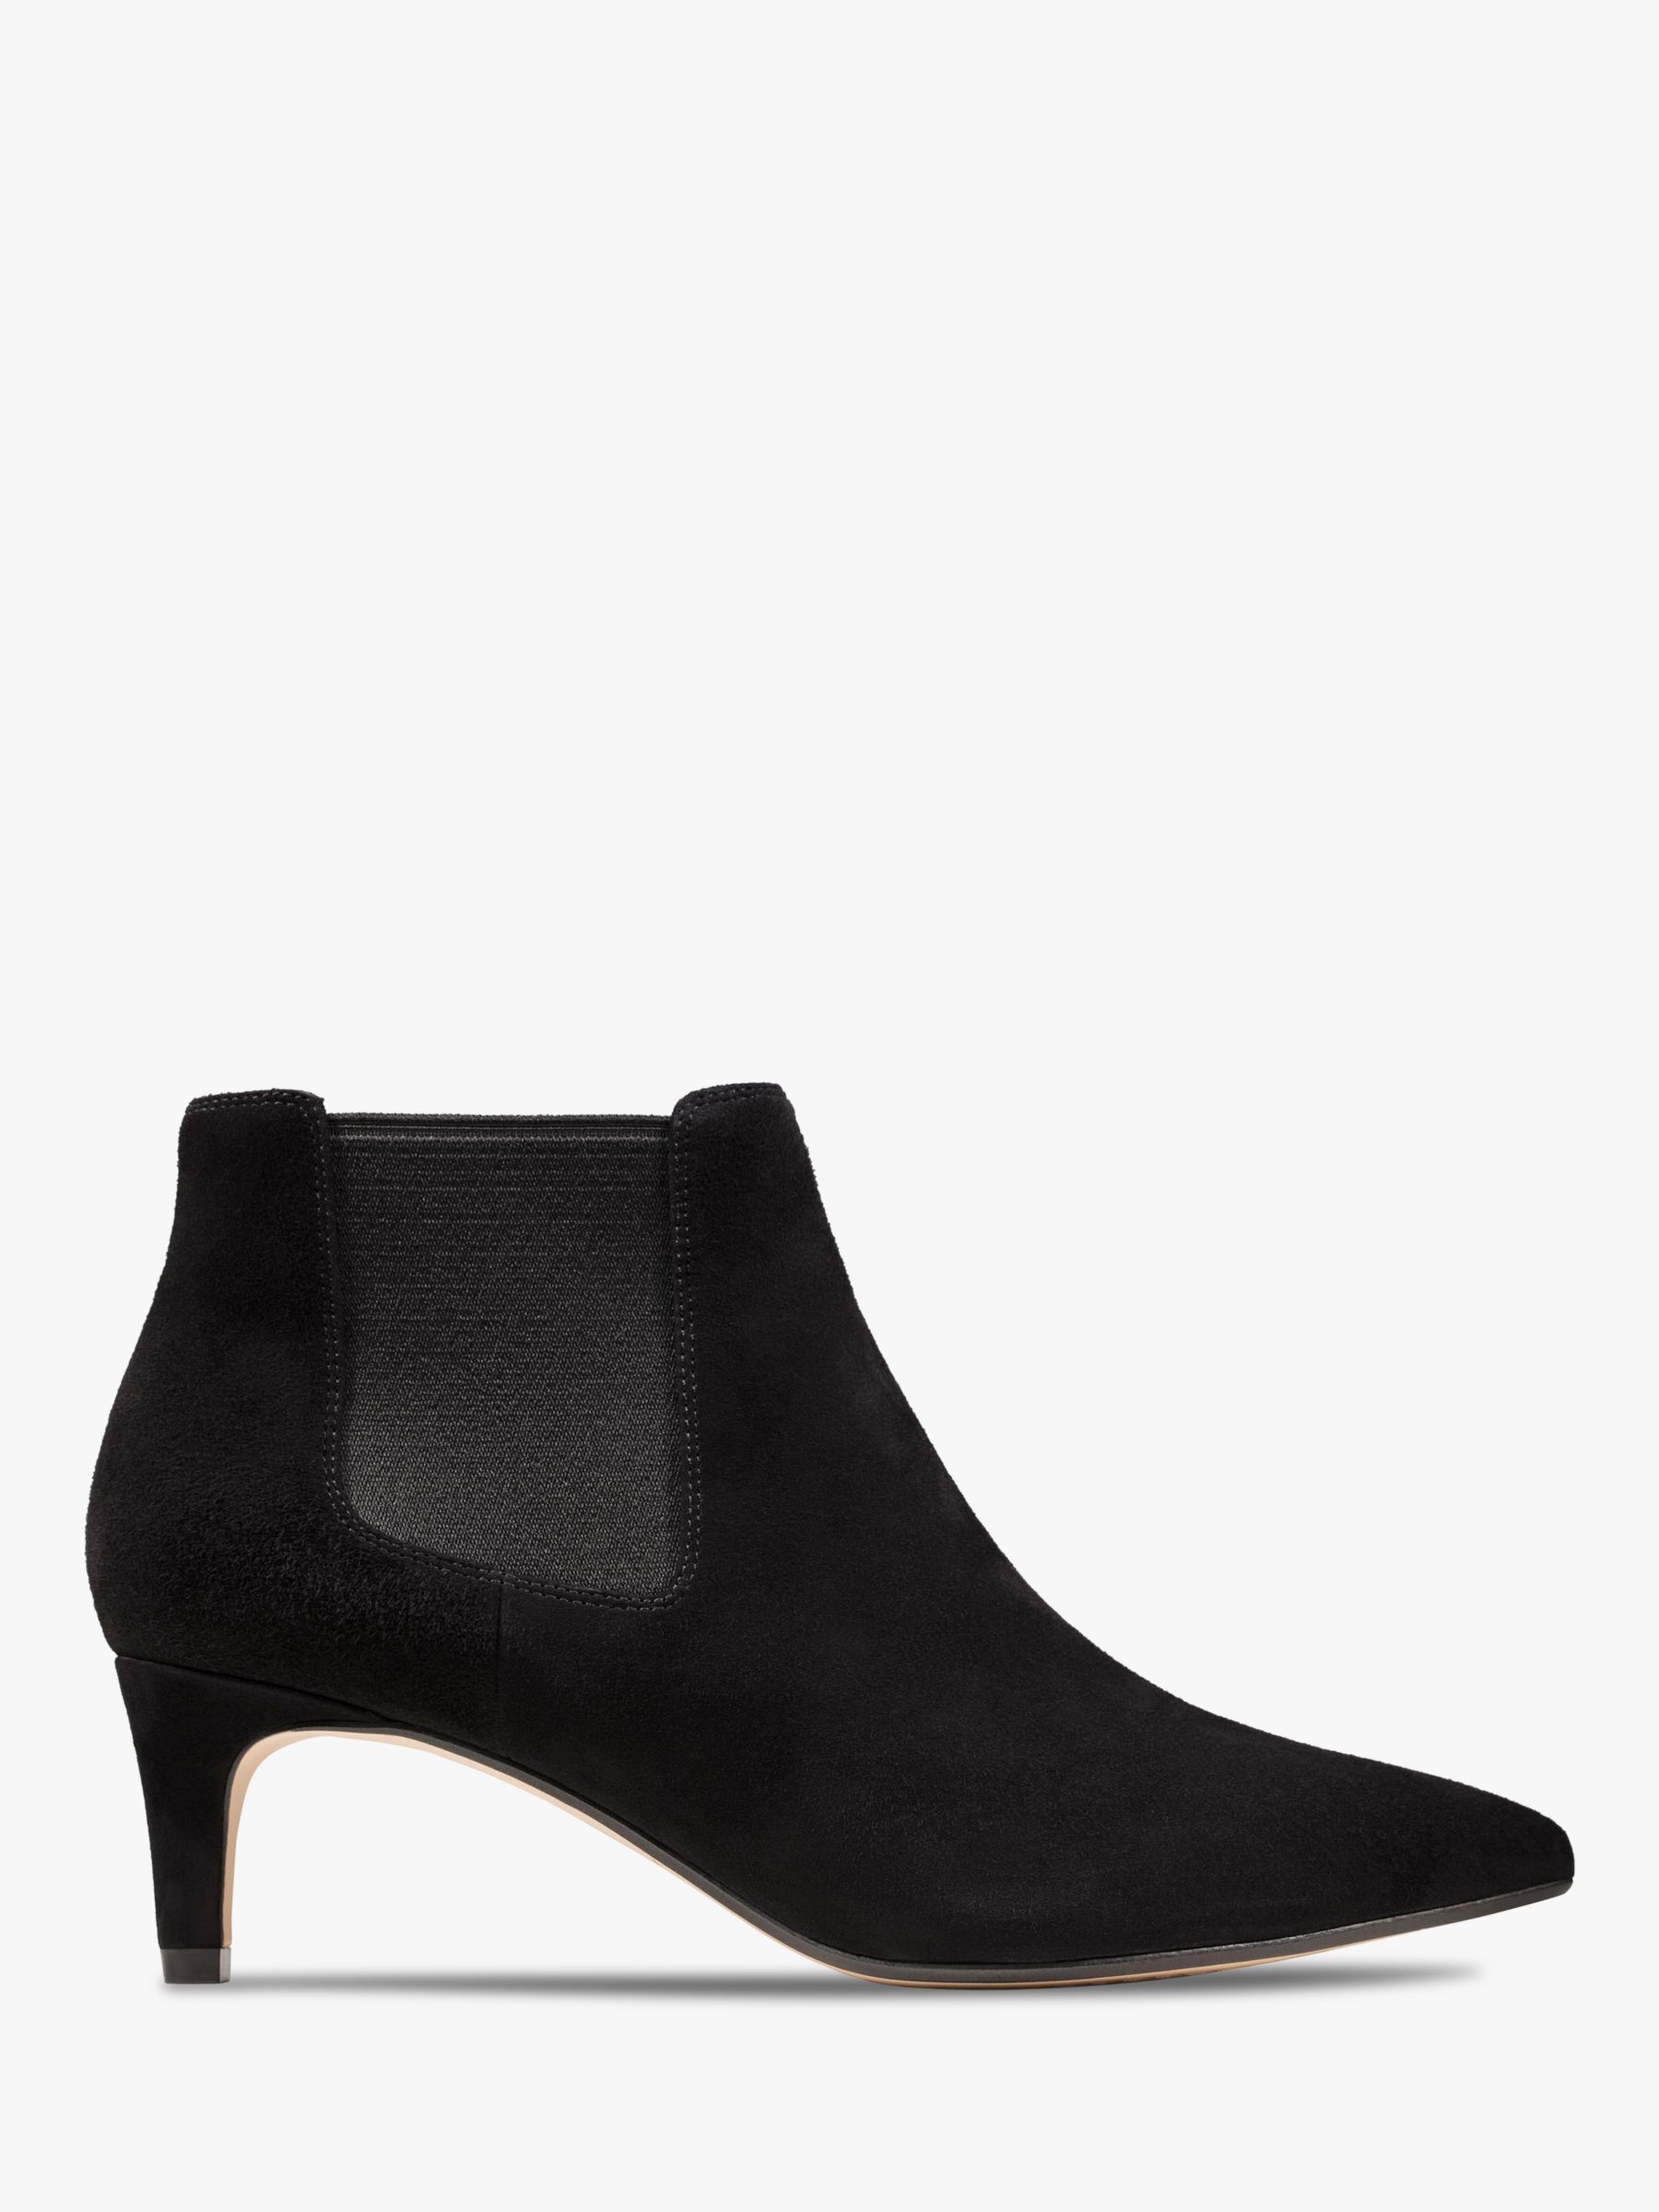 clarks suede chelsea boots womens